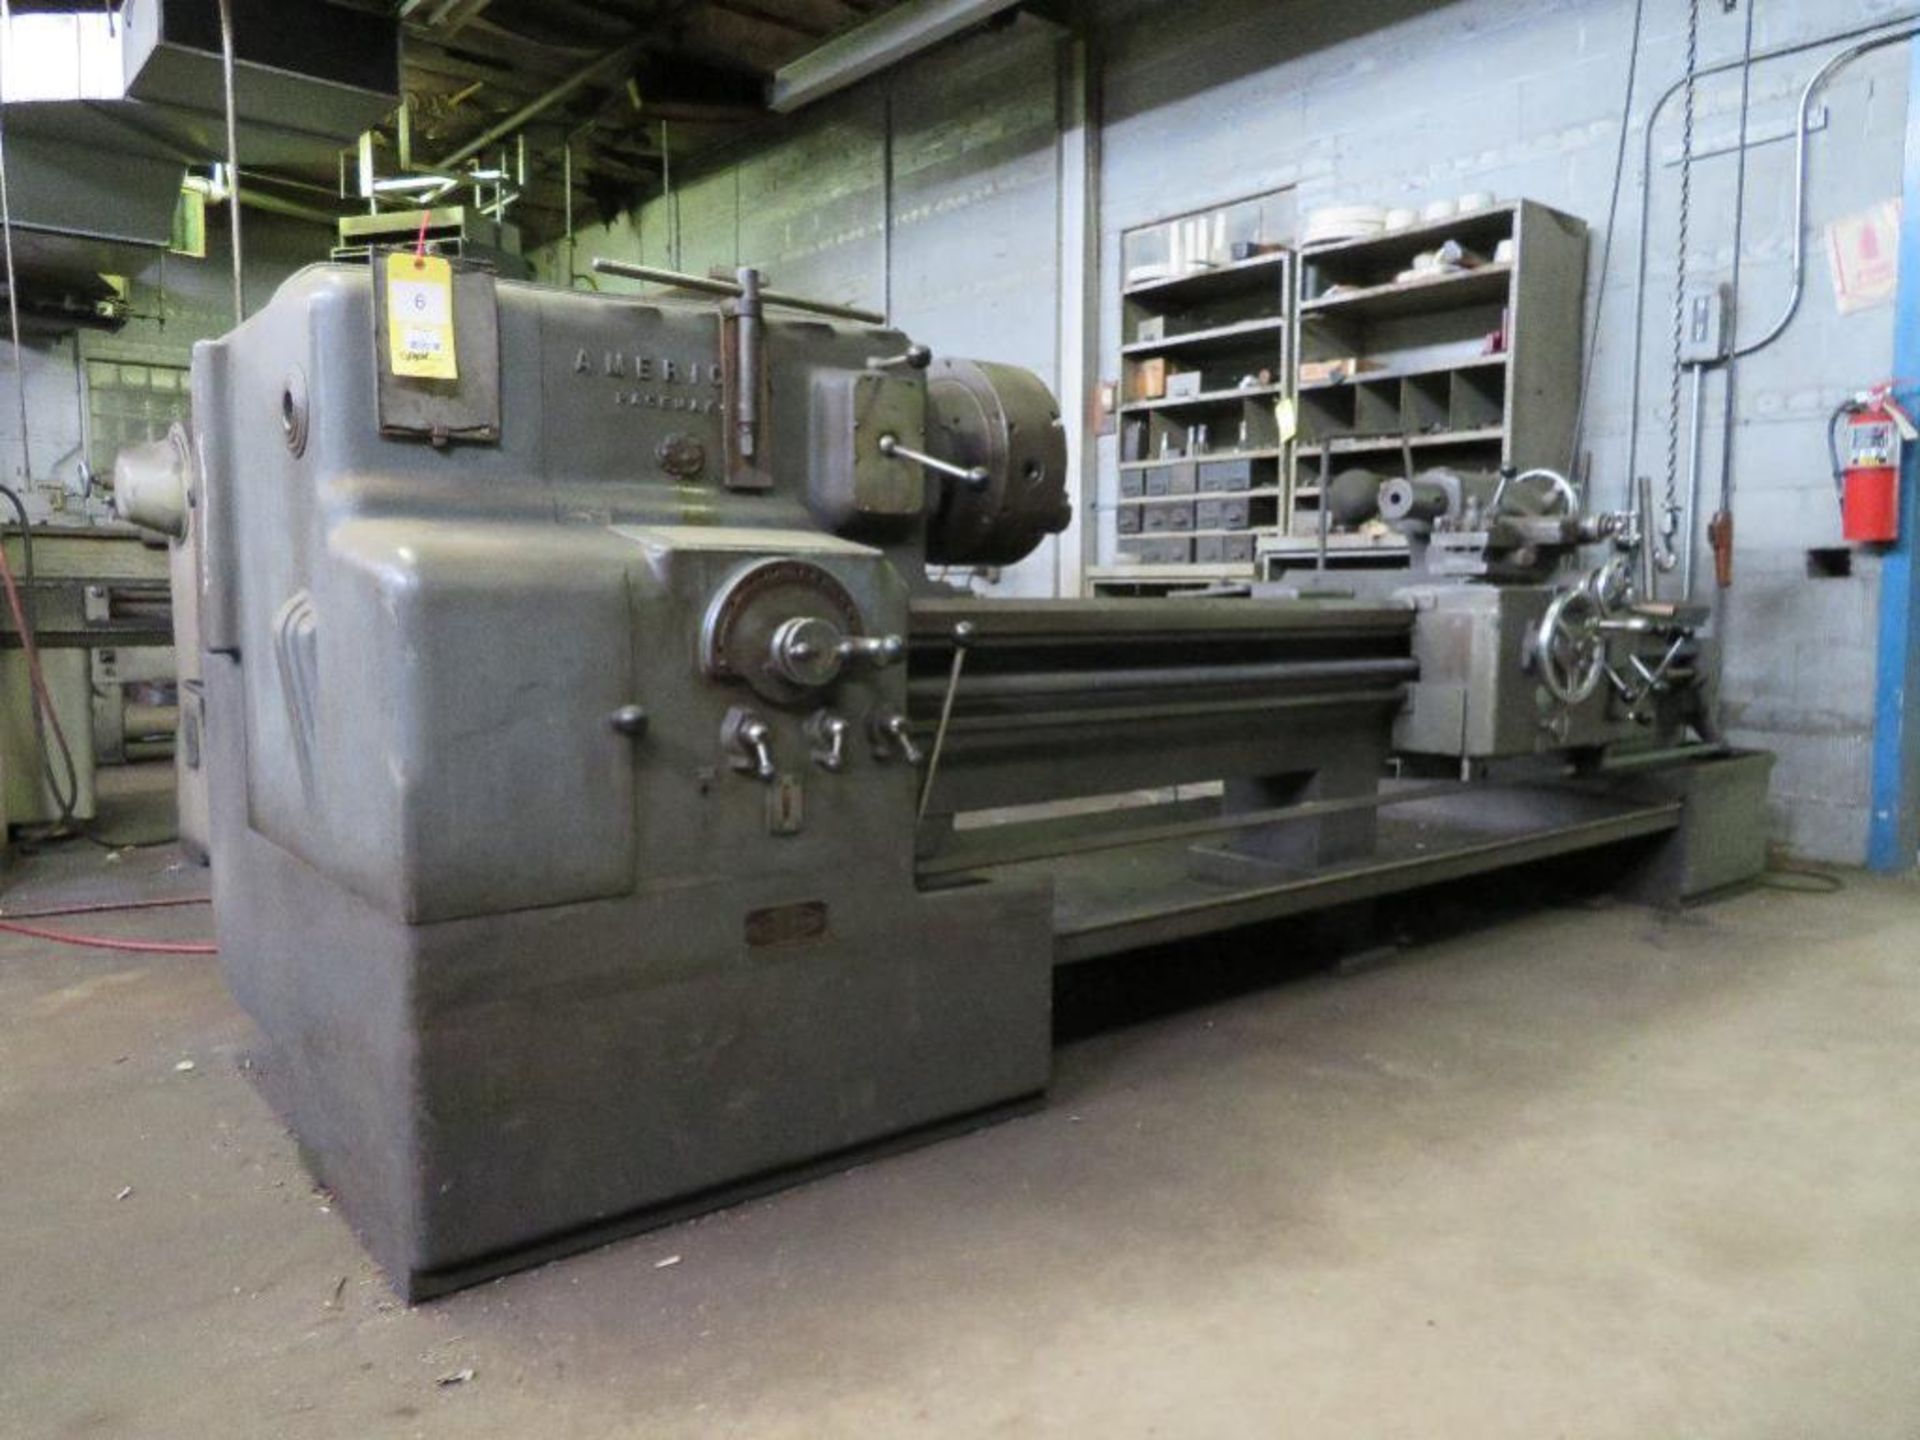 American Pacemaker 16 in. x 78 in. Geared Head Engine Lathe, S/N 75204-56, 25 - 1500 RPM, 15? 3-Jaw - Image 2 of 3